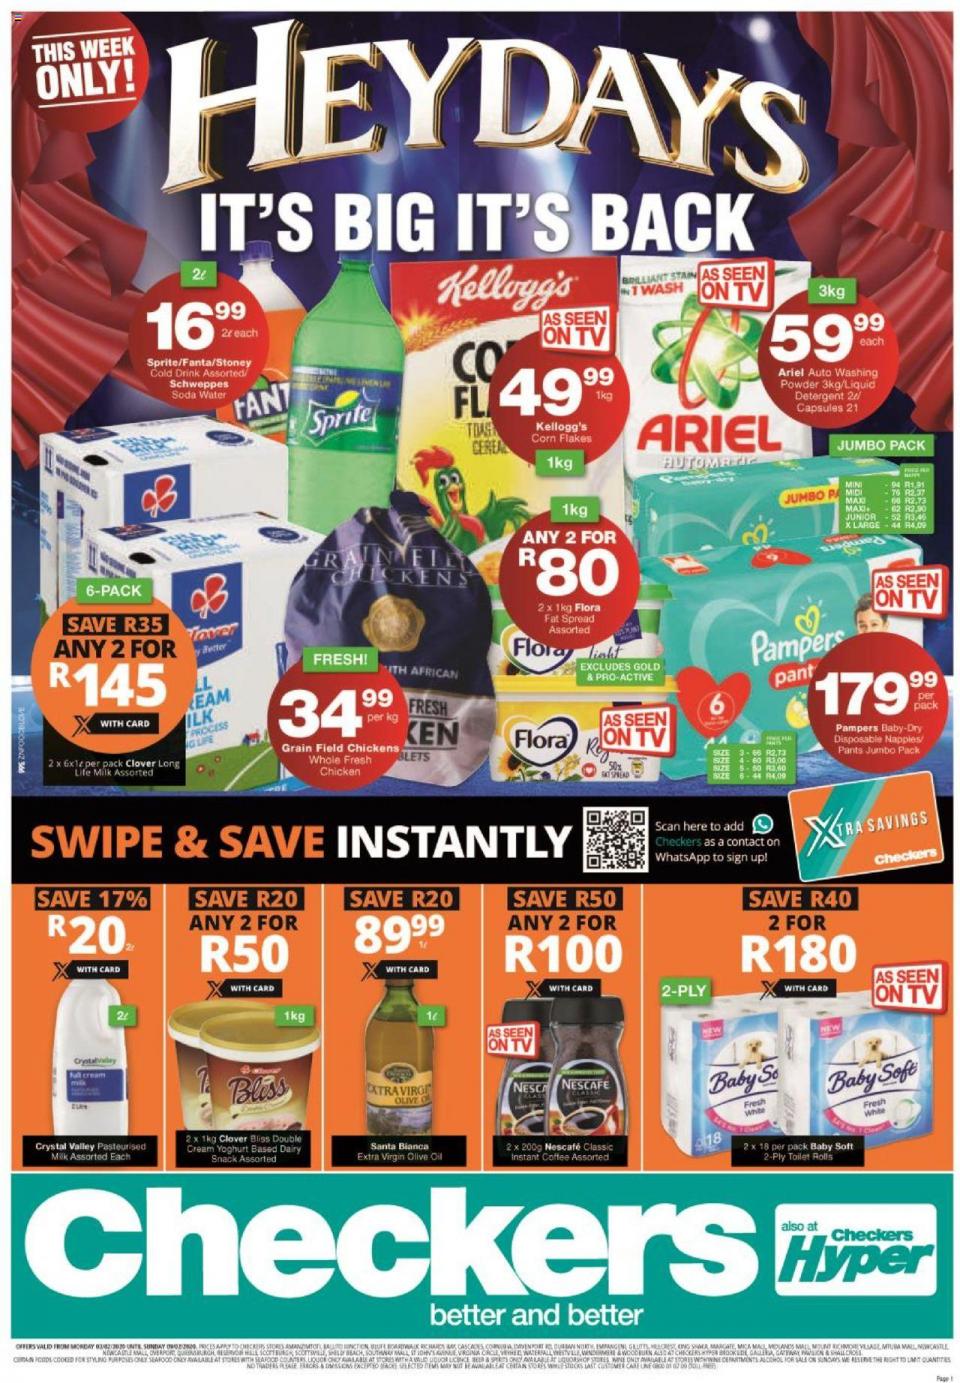 Checkers Specials l Heydays Promotion 3 February 2020